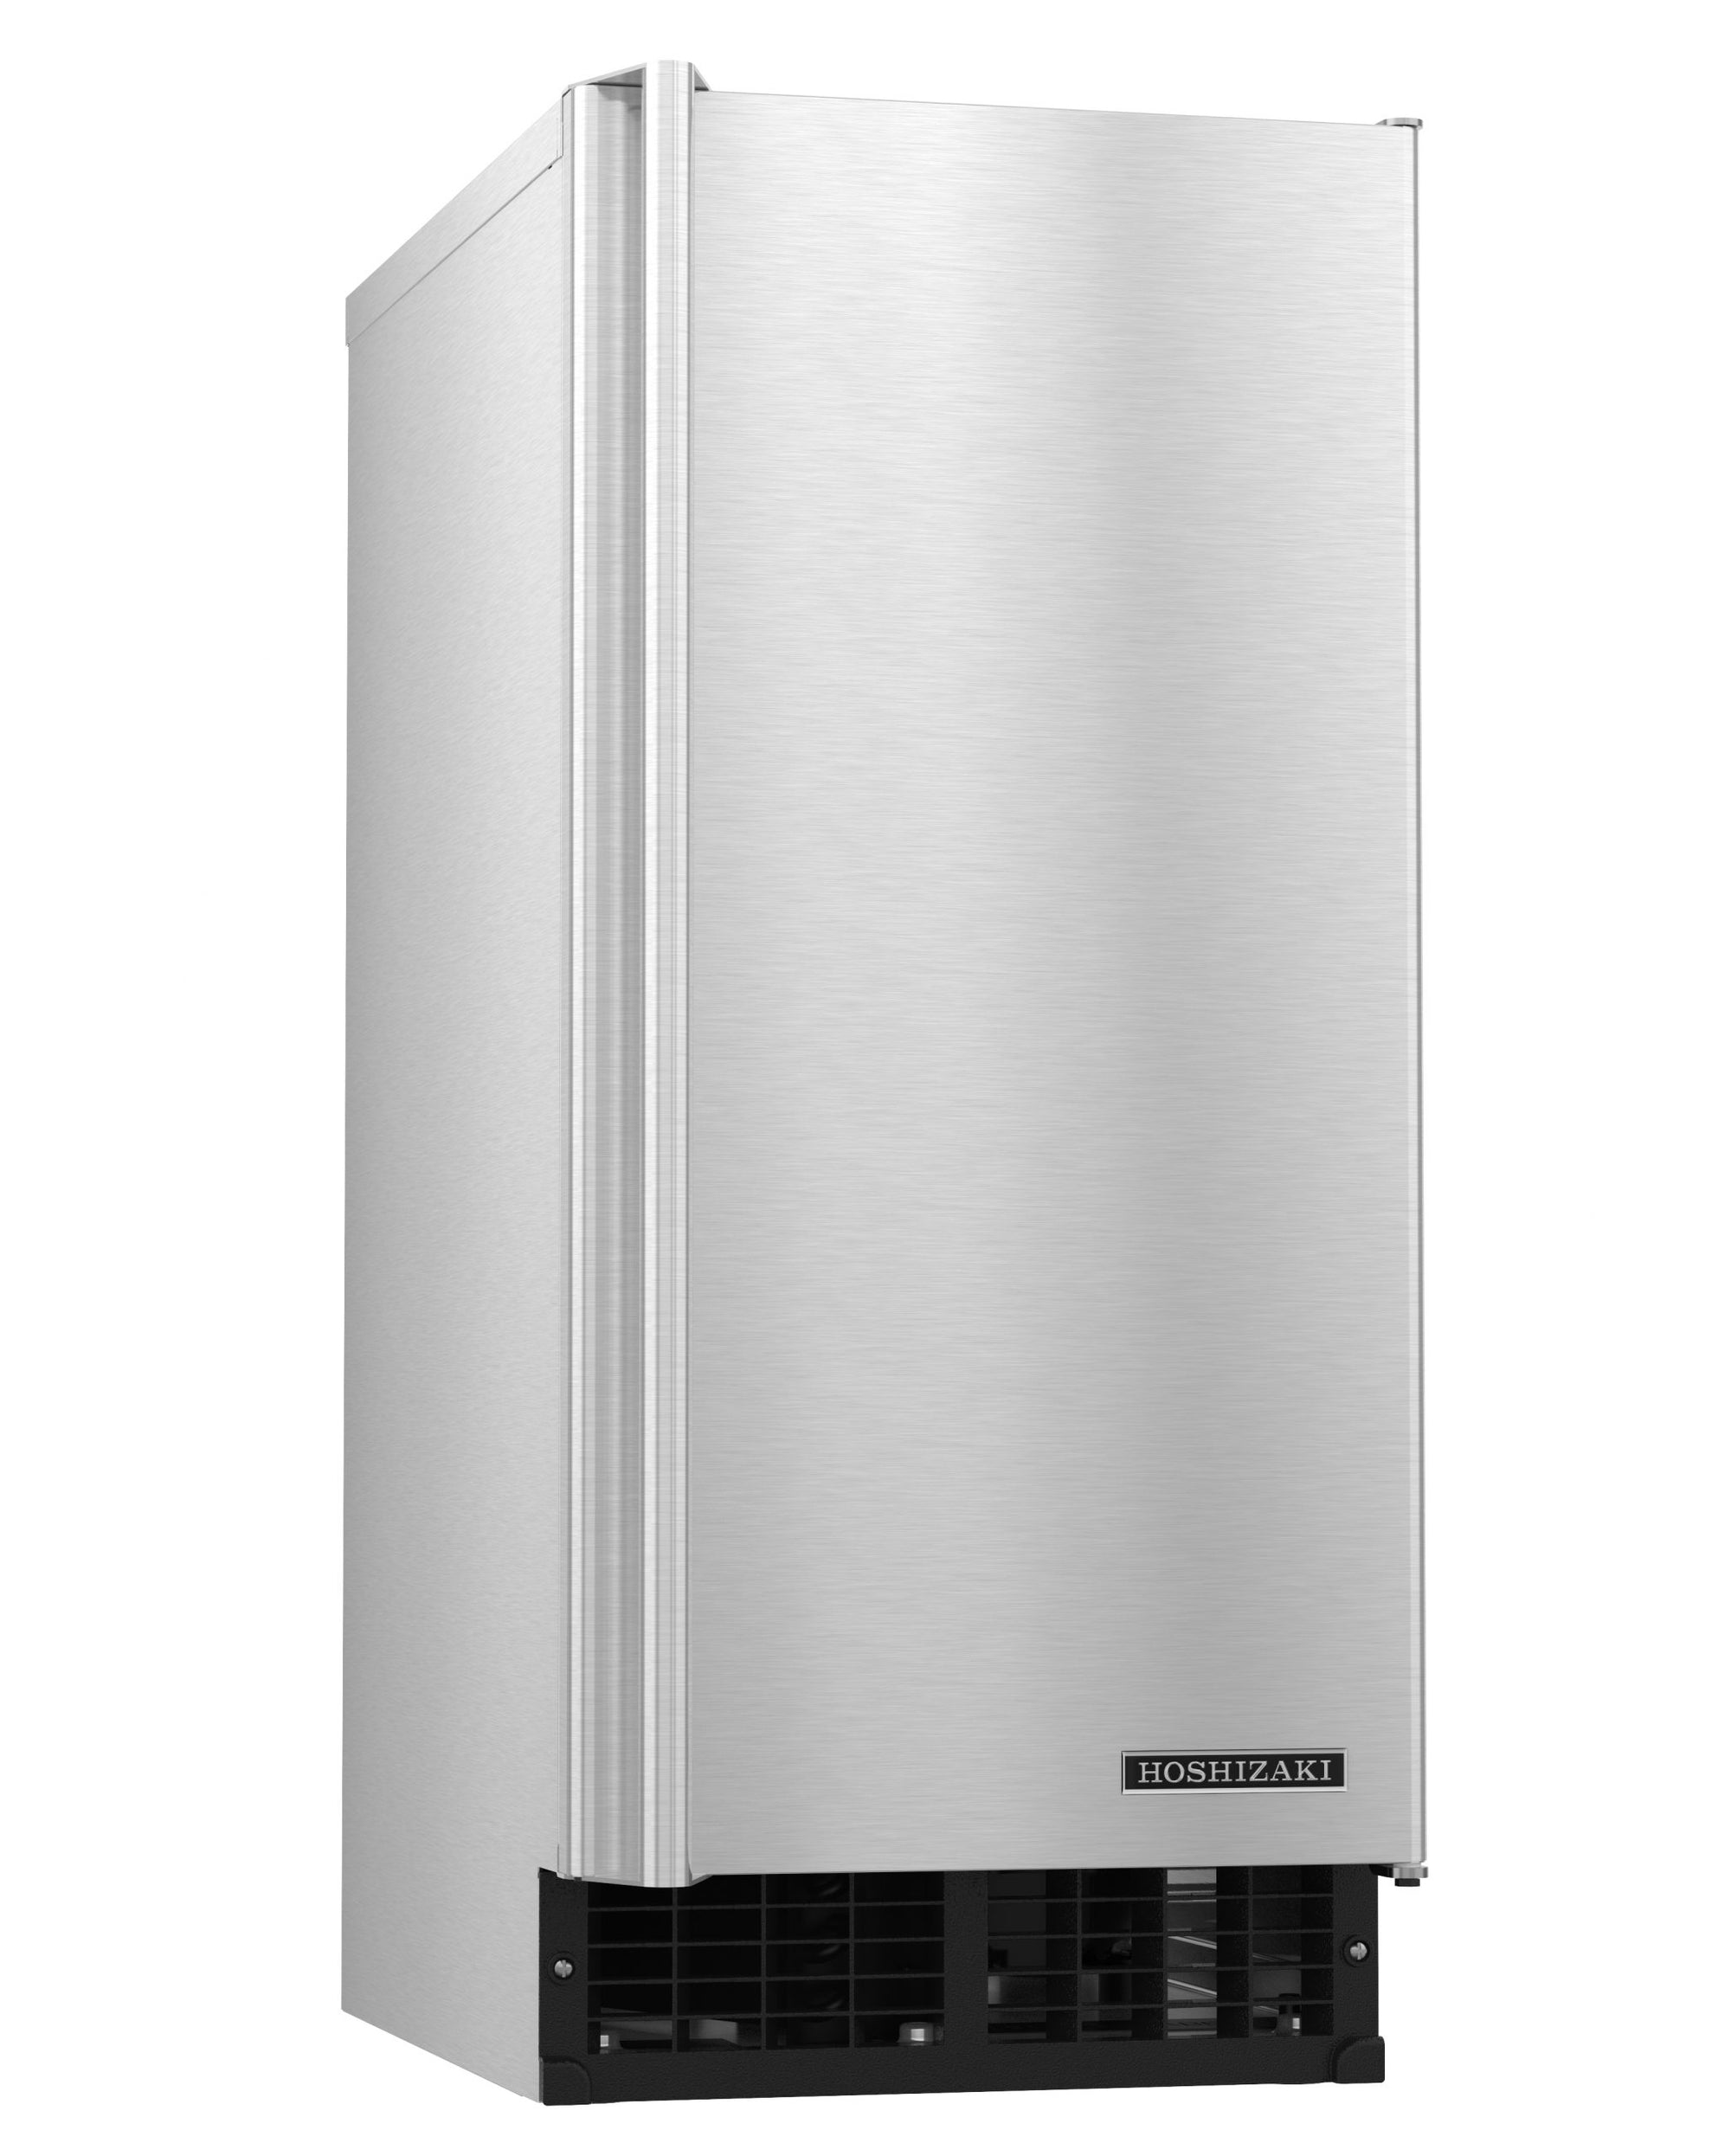 Hoshizaki C-80BAJ | Self-Contained Cubelet Icemaker, Air-cooled, 22 lbs capacity